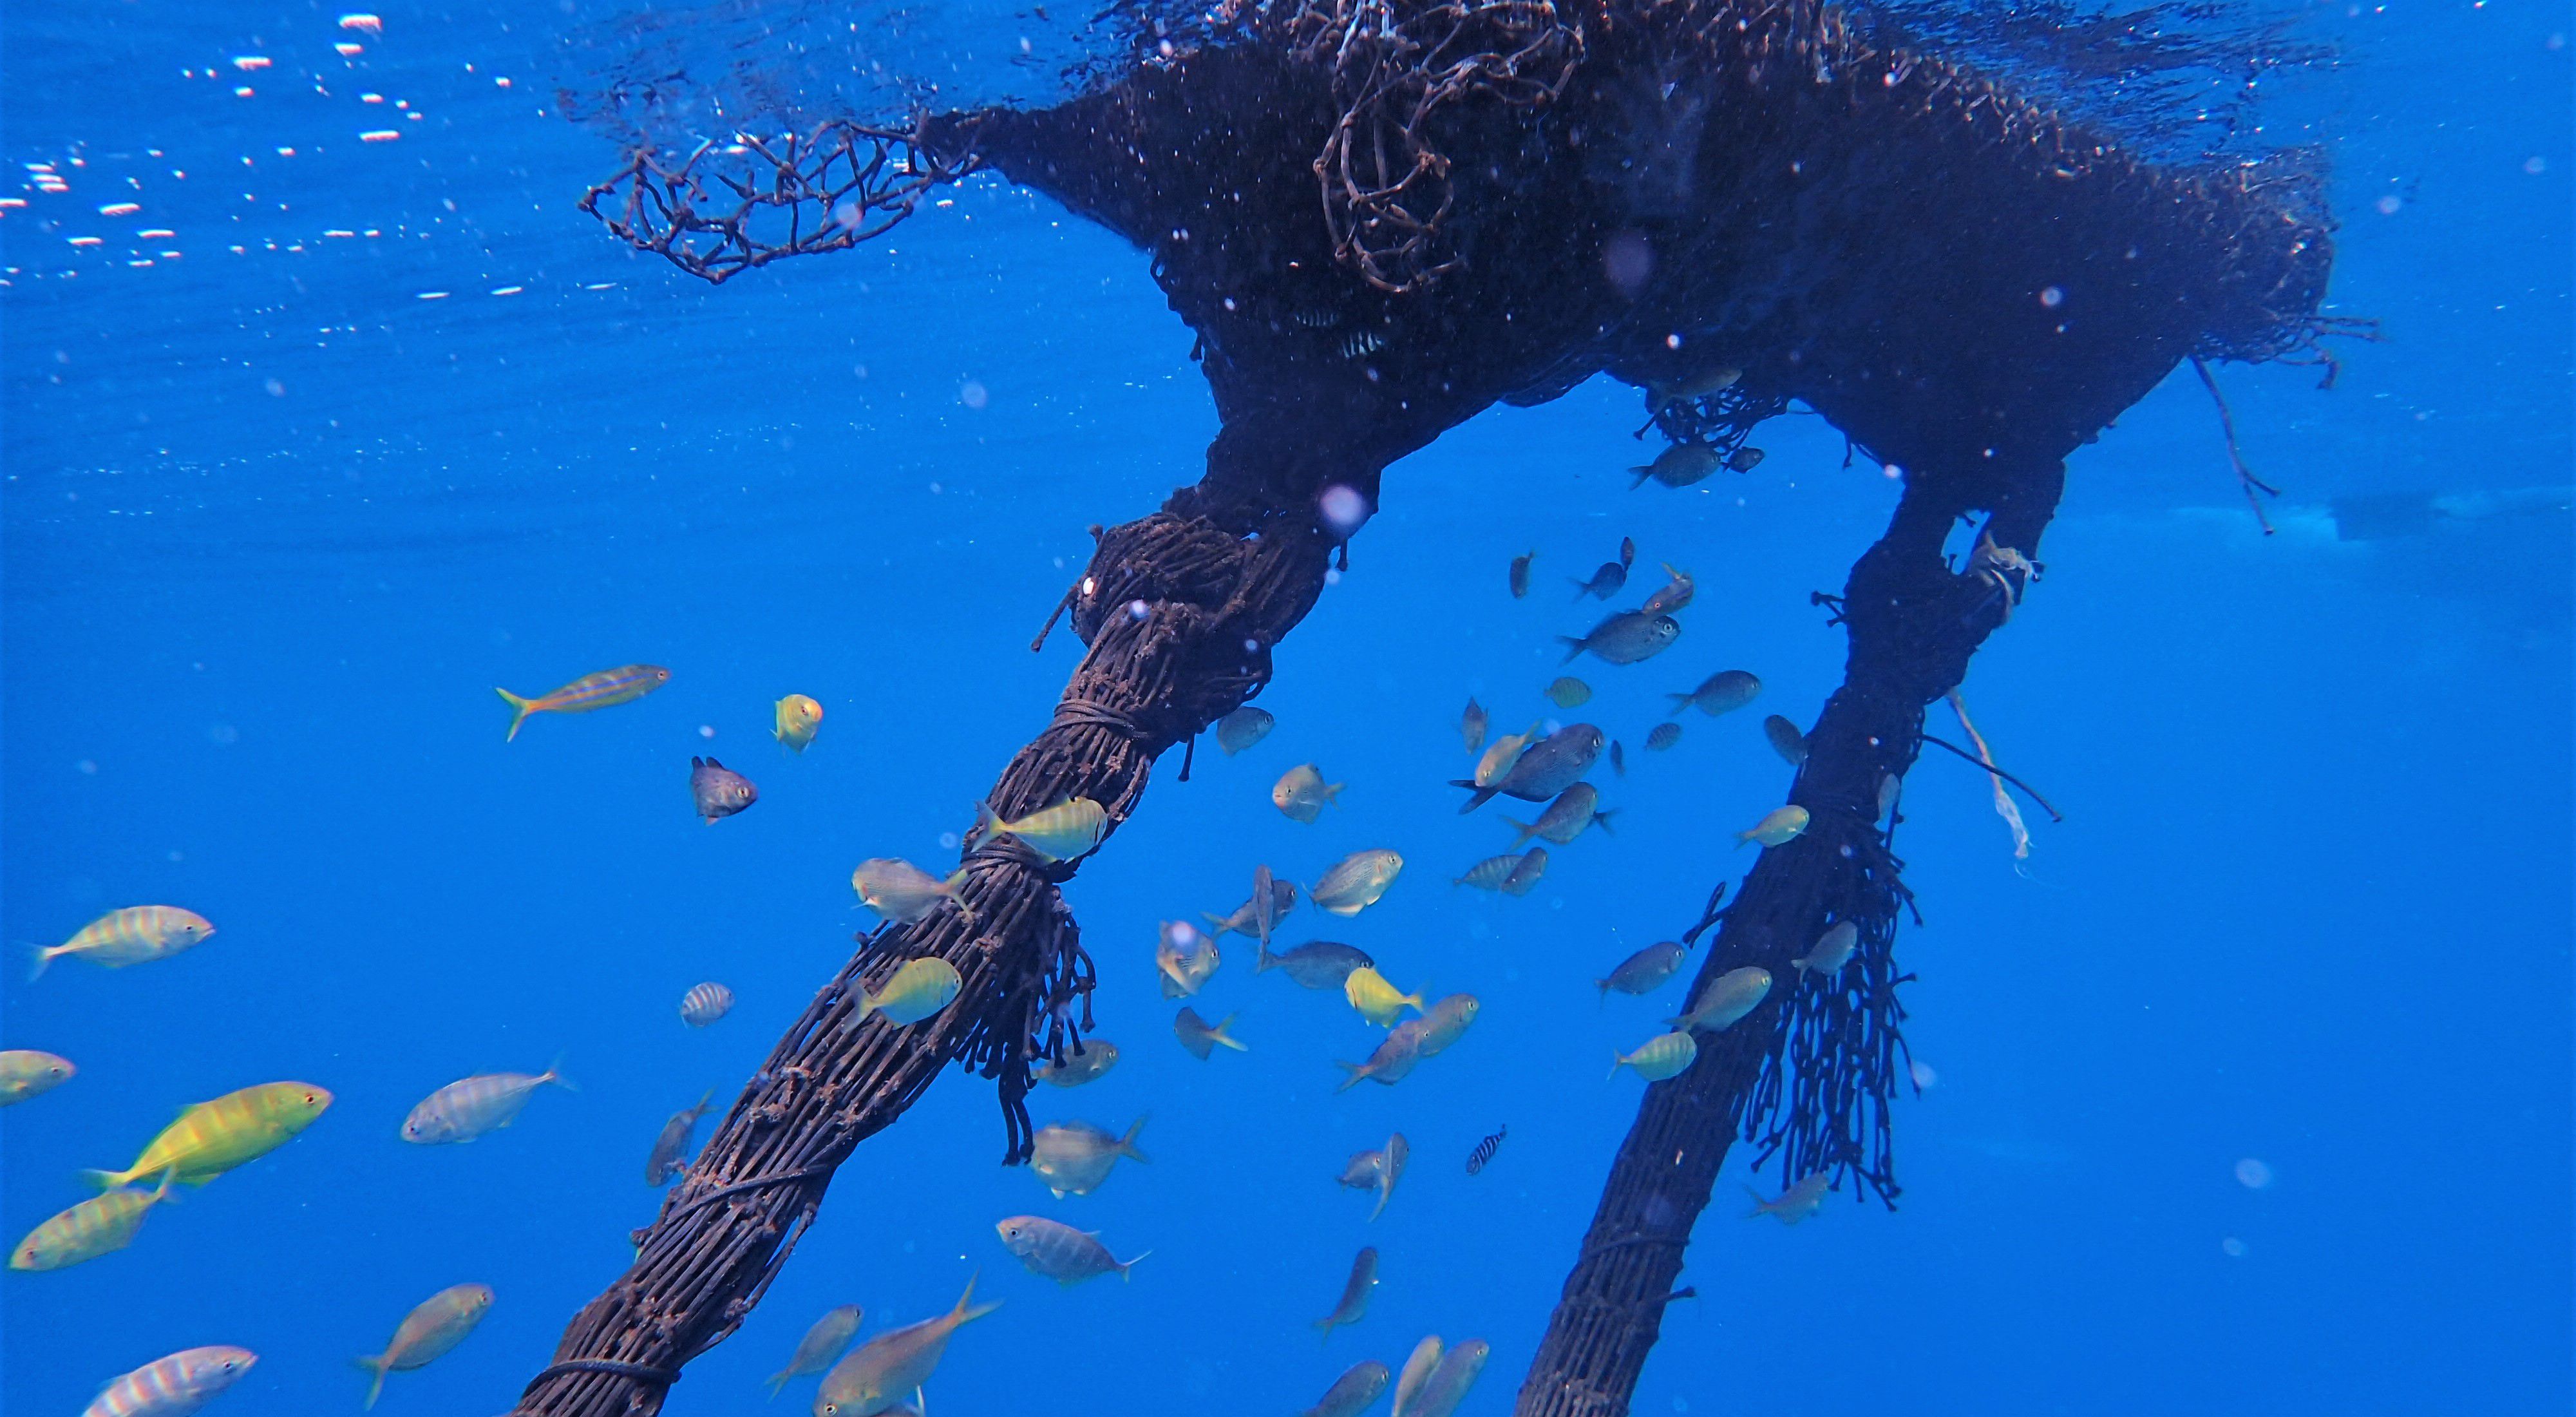 Underwater view of a fish aggregating device, a raft that attracts fish.